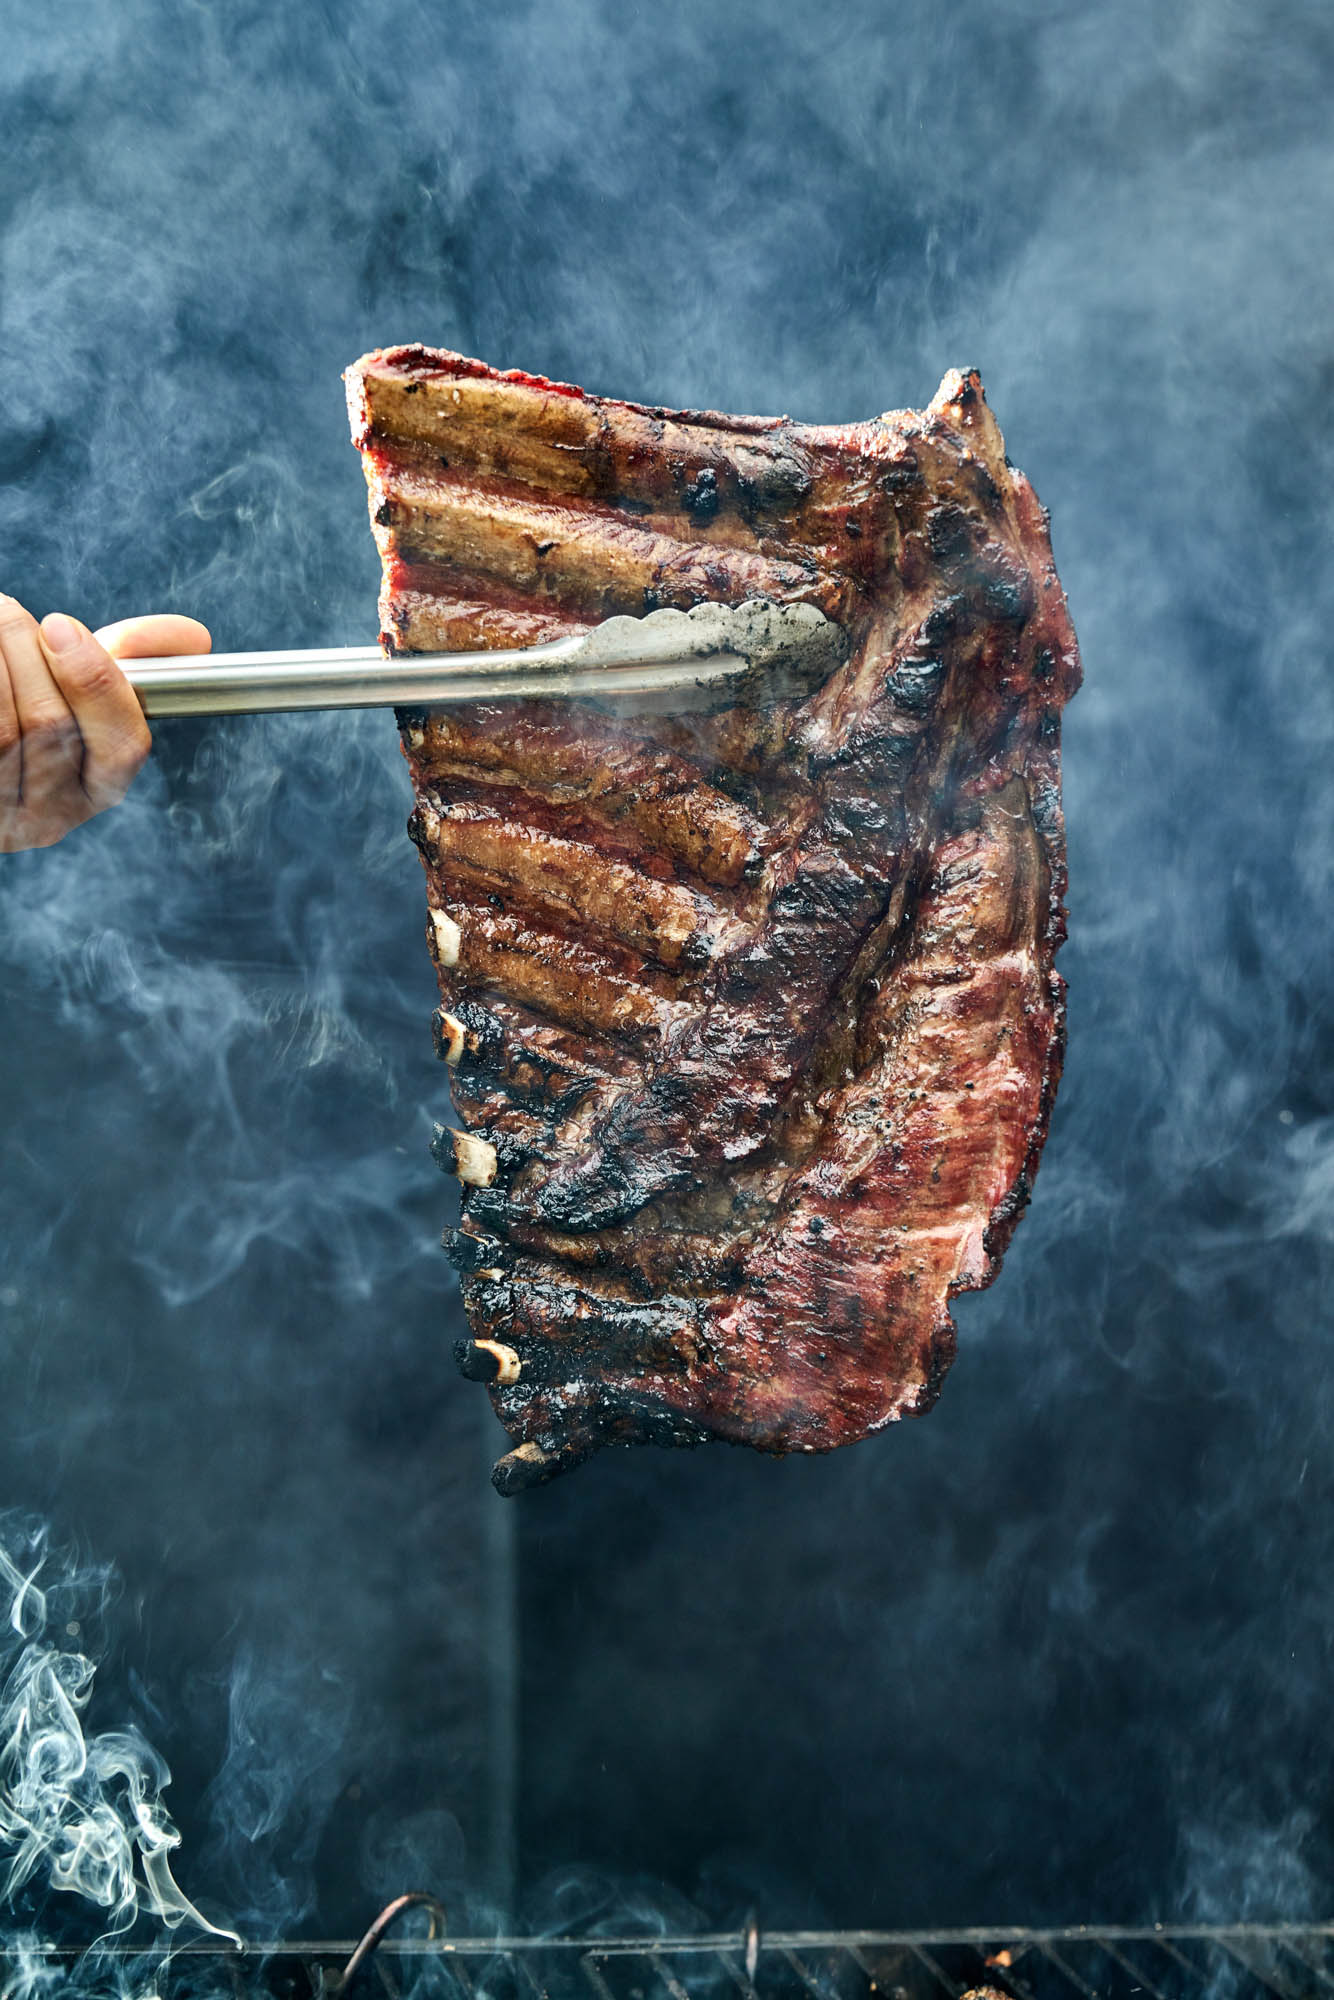 190504_HARTWOOD_OUTDOOR_KITCHEN_SHOOT_03_HARTWOOD_SPICED_GRILLED_SPARE_RIBS_106